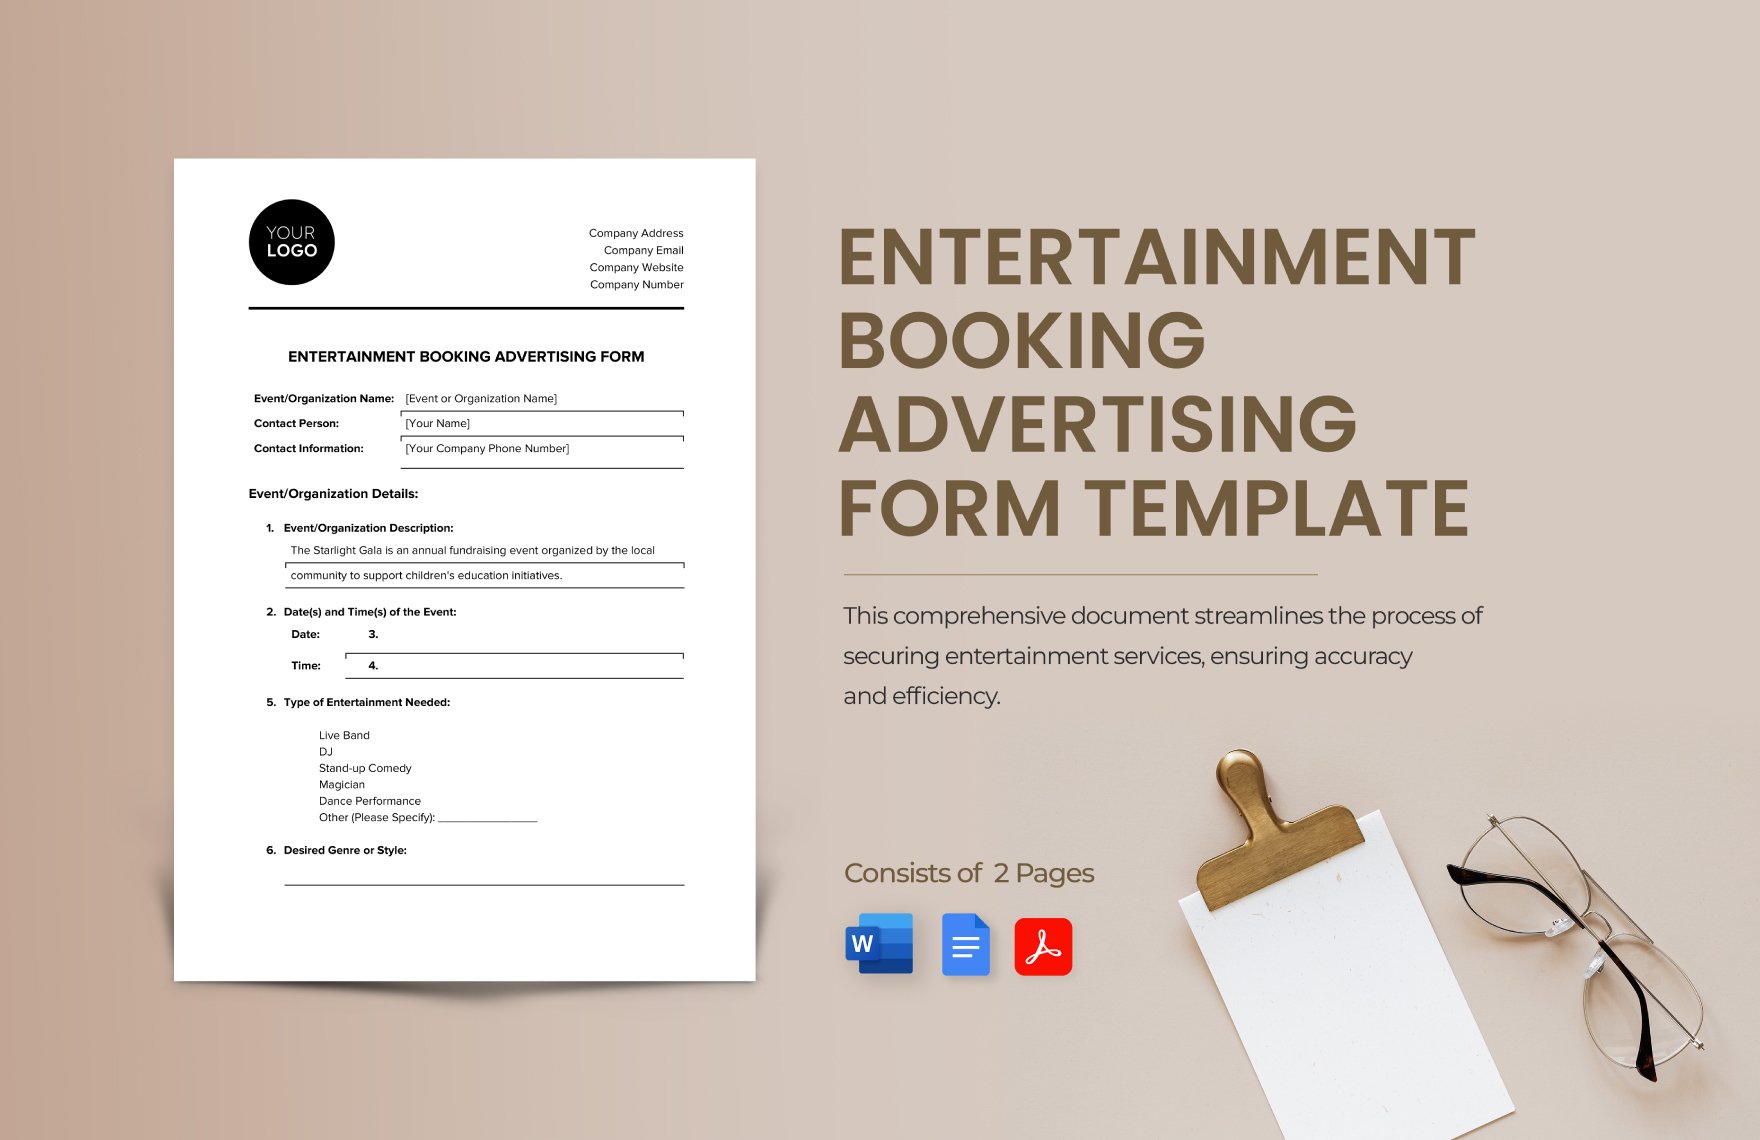 Free Entertainment Booking Advertising Form Template in Word, Google Docs, PDF